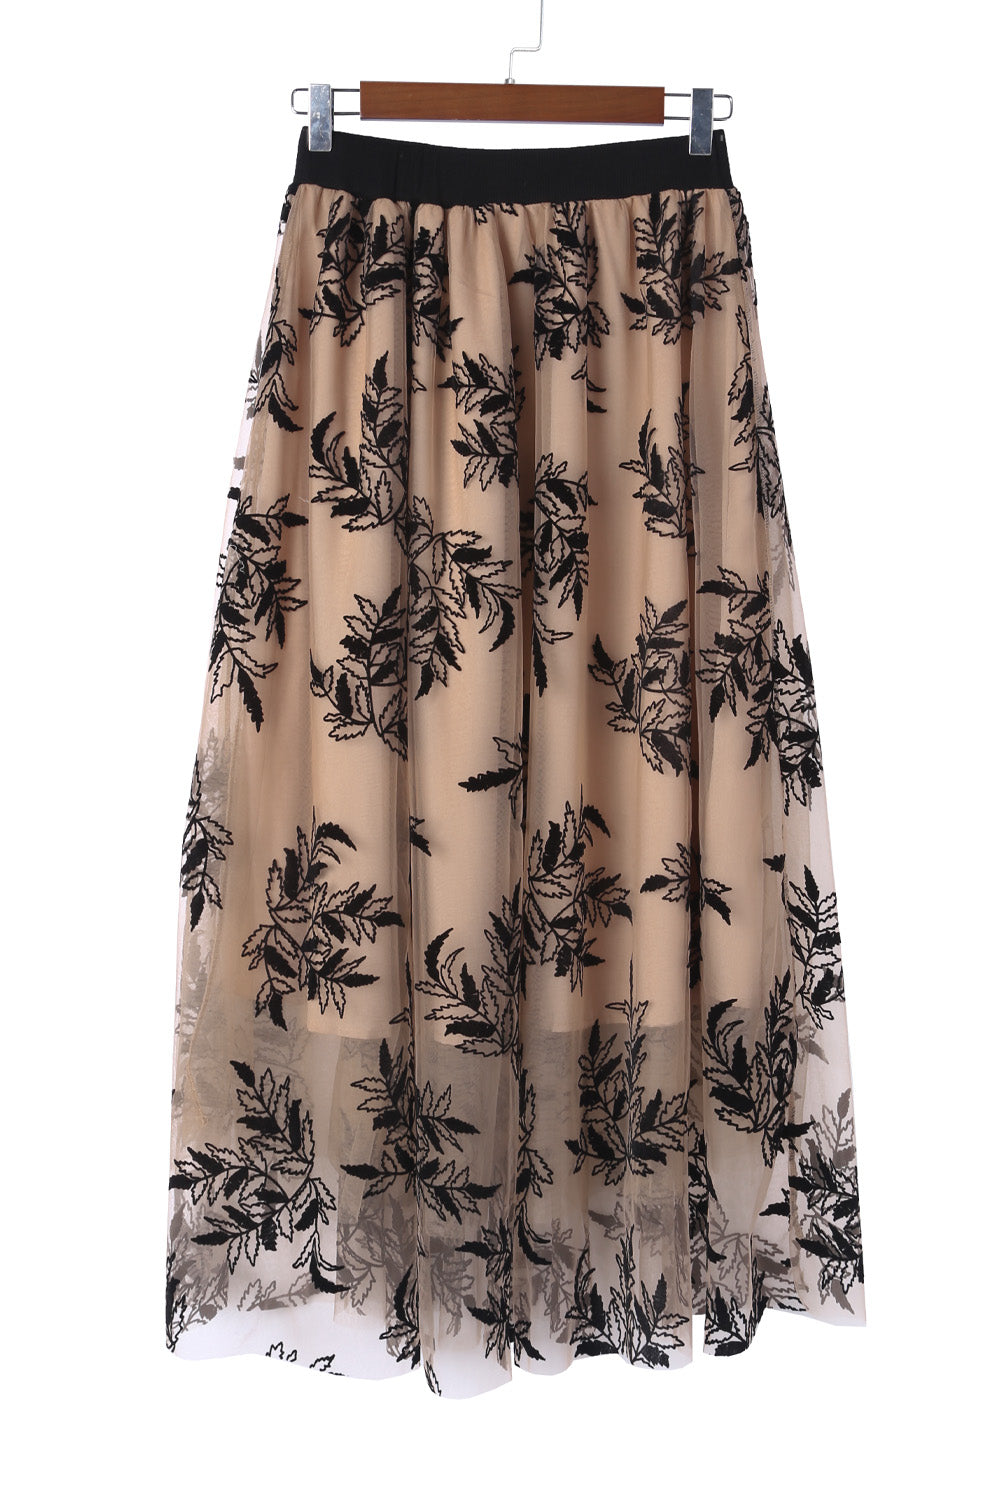 Apricot Floral Leaves Embroidered High Waist Maxi Skirt - SELFTRITSS